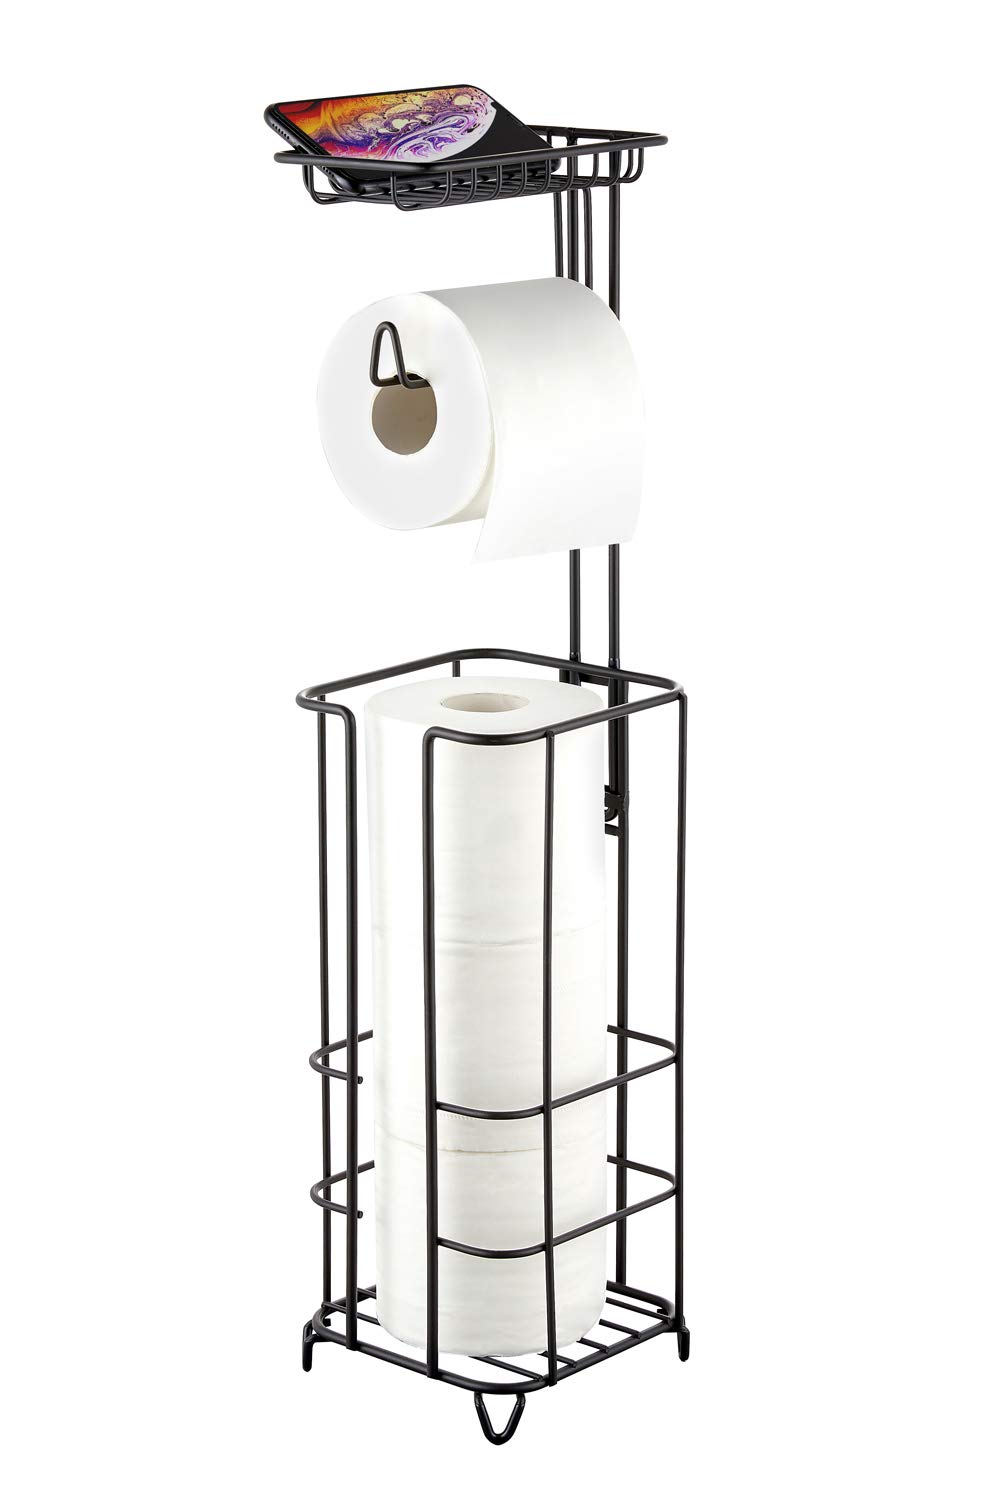 zccz Toilet Paper Holder Stand with Reserve, Free Standing Toilet Roll